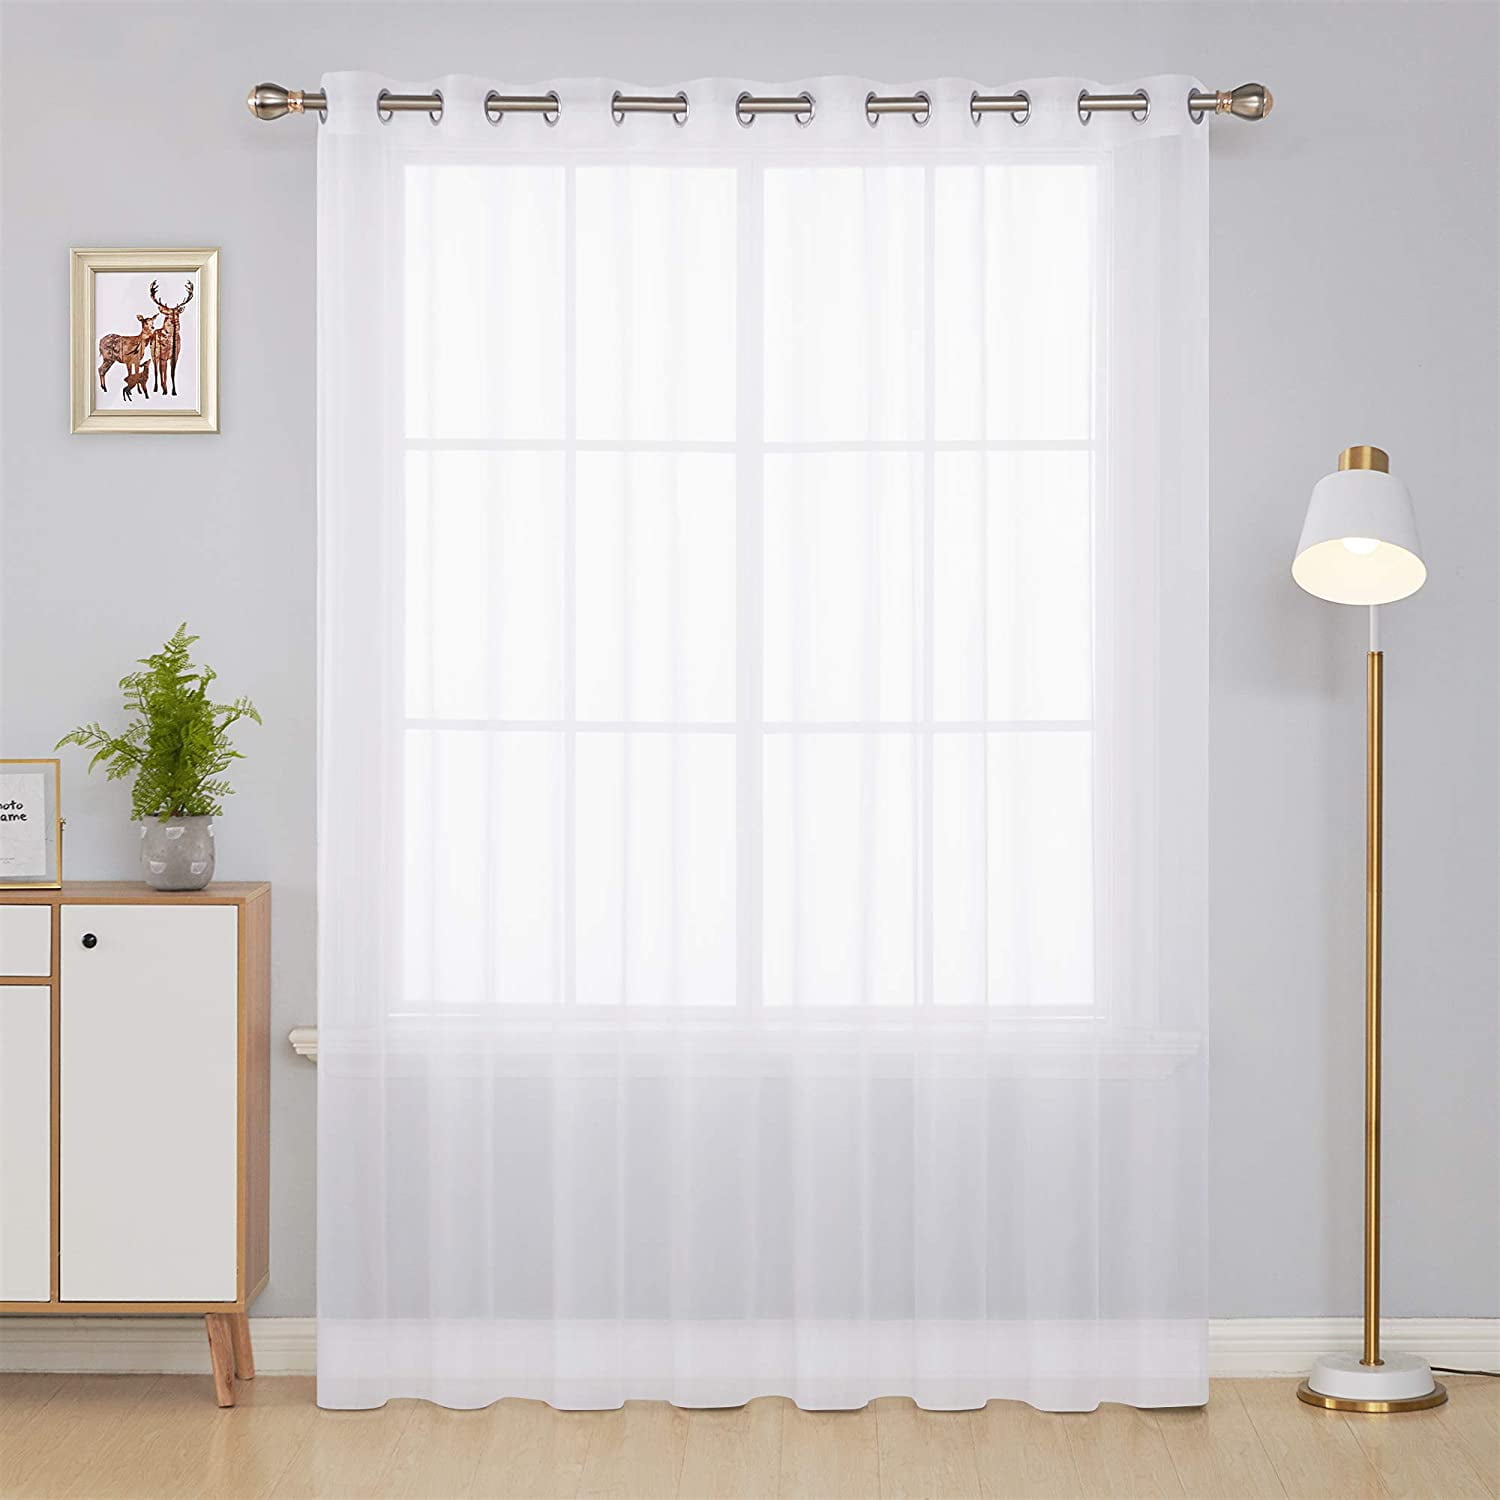 Deconvo Floral Embroidered White Sheer Curtains Faux Linen Rod Pocket Sheer Curtain Panels for Bedroom 52x63 Inch White 2 Panels 